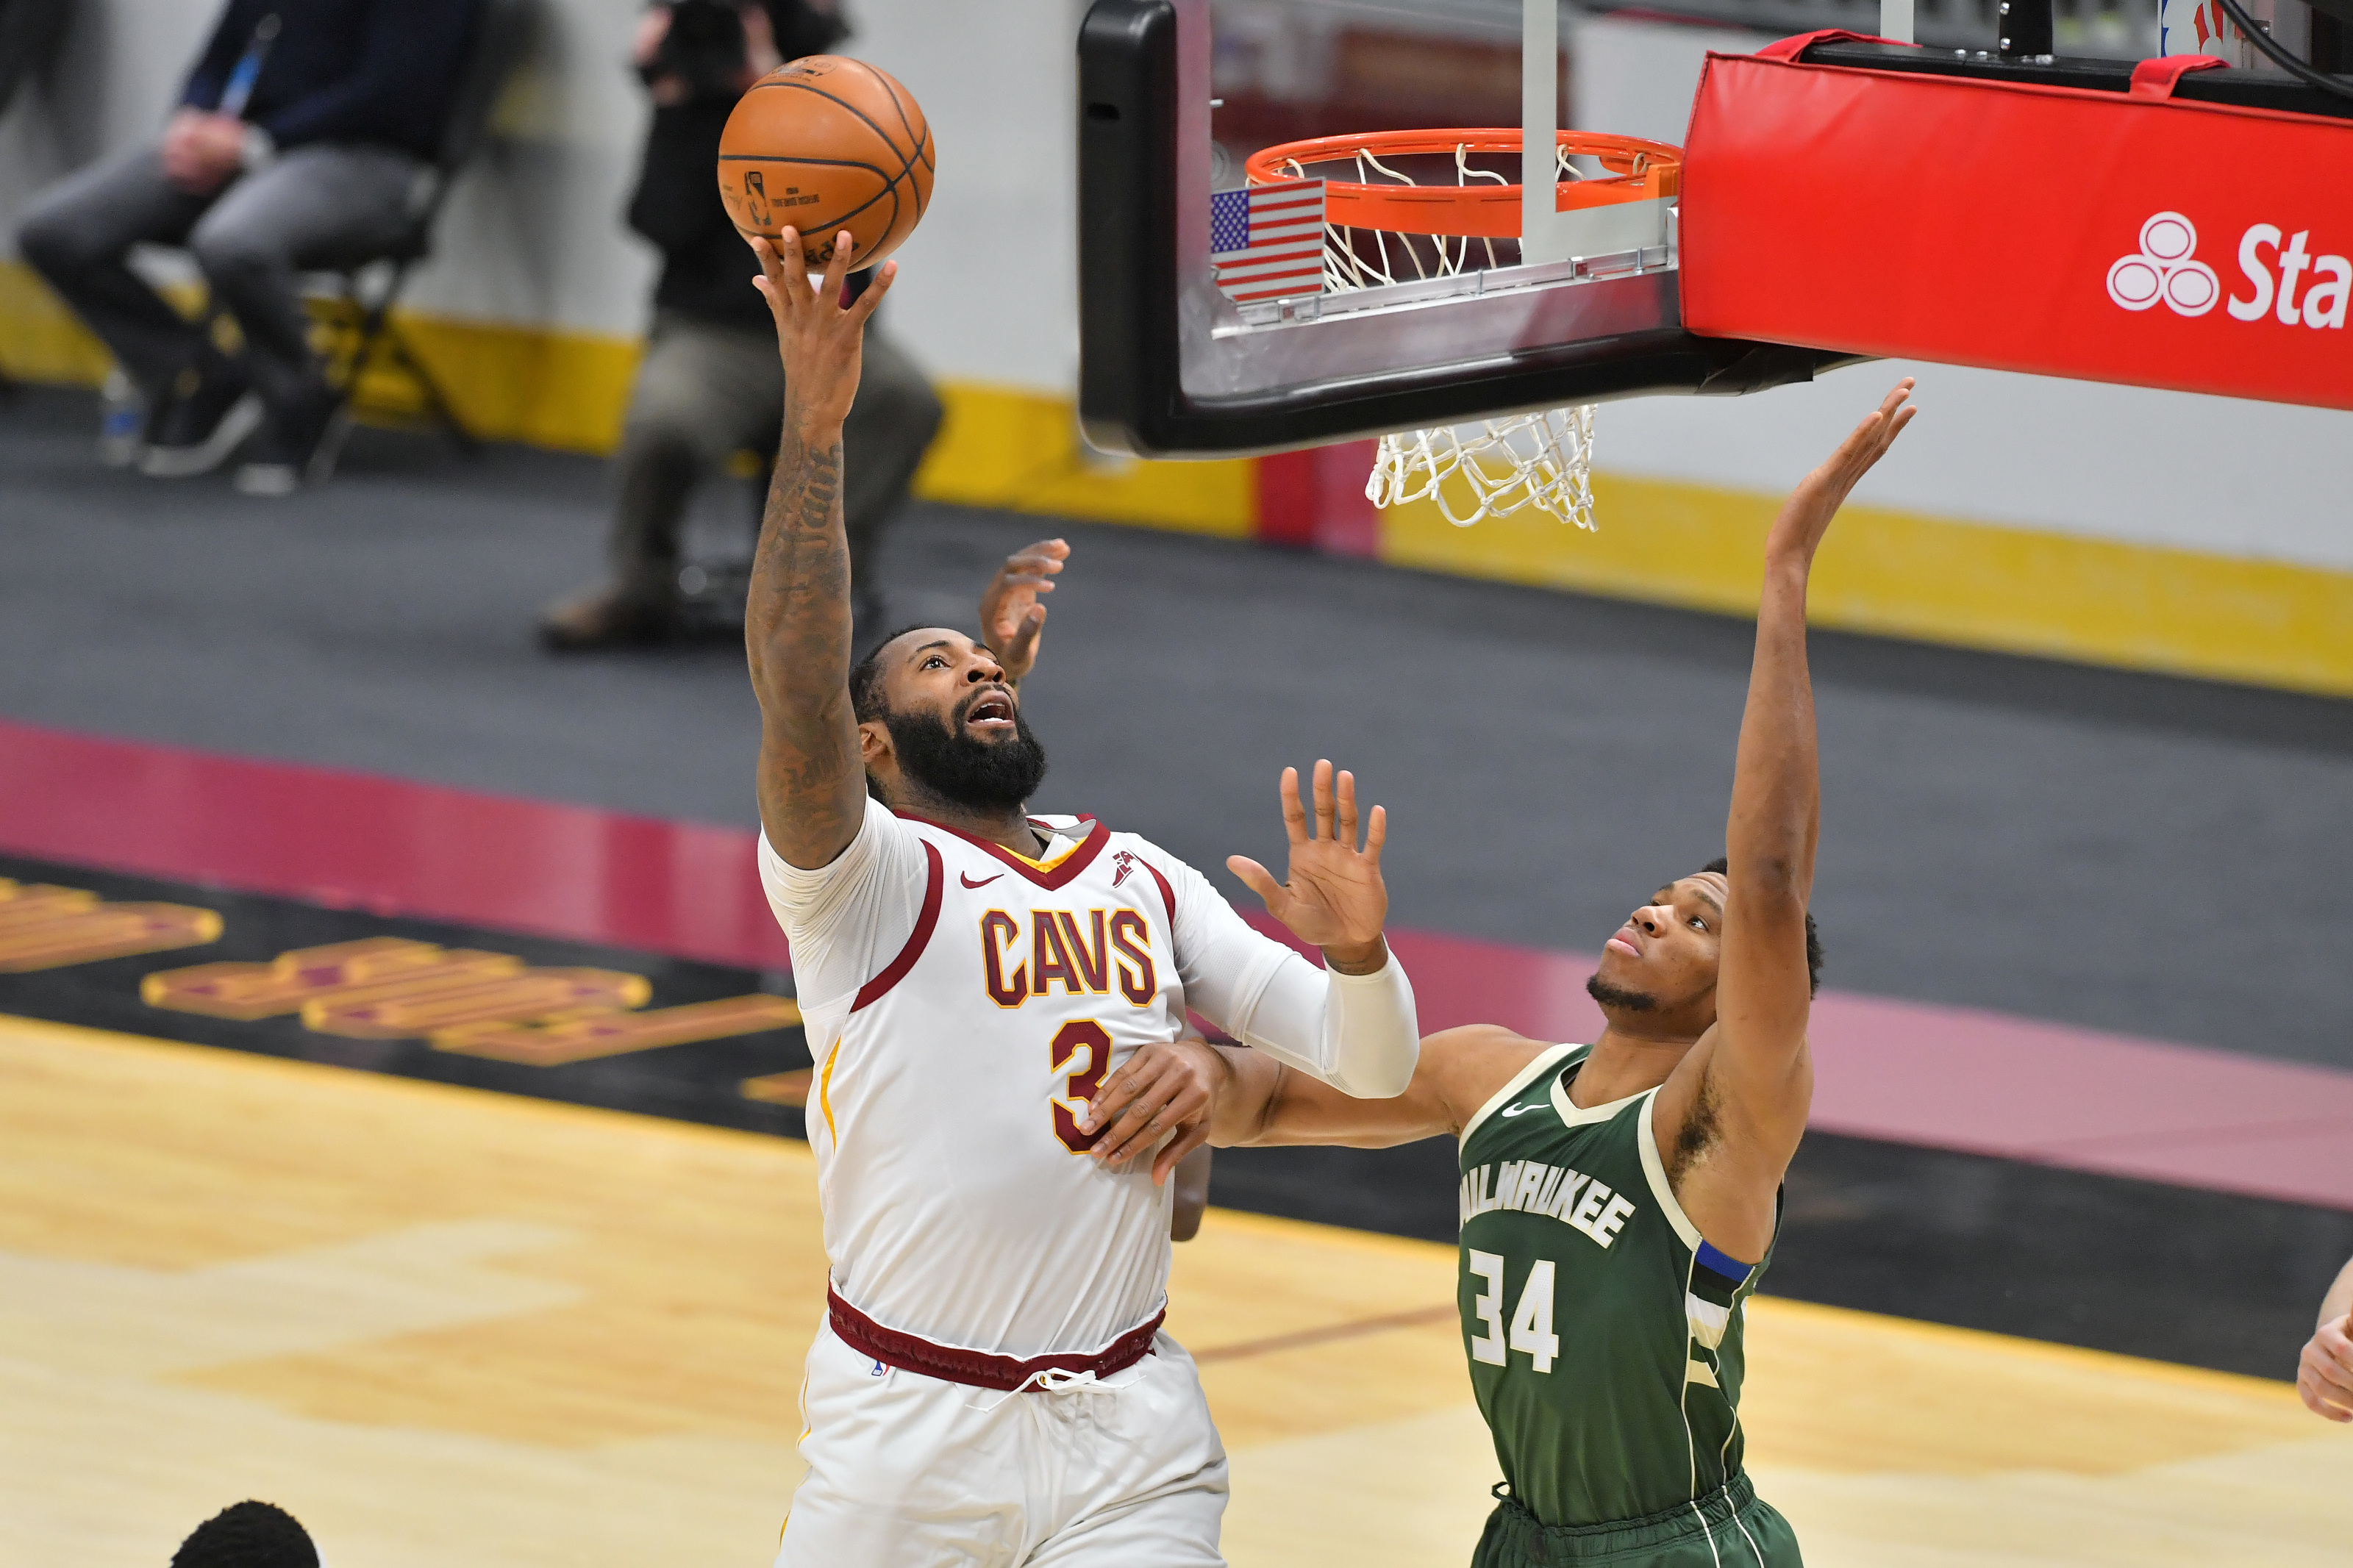 Lakers, Nets among possibilities for Cleveland Cavaliers' Drummond